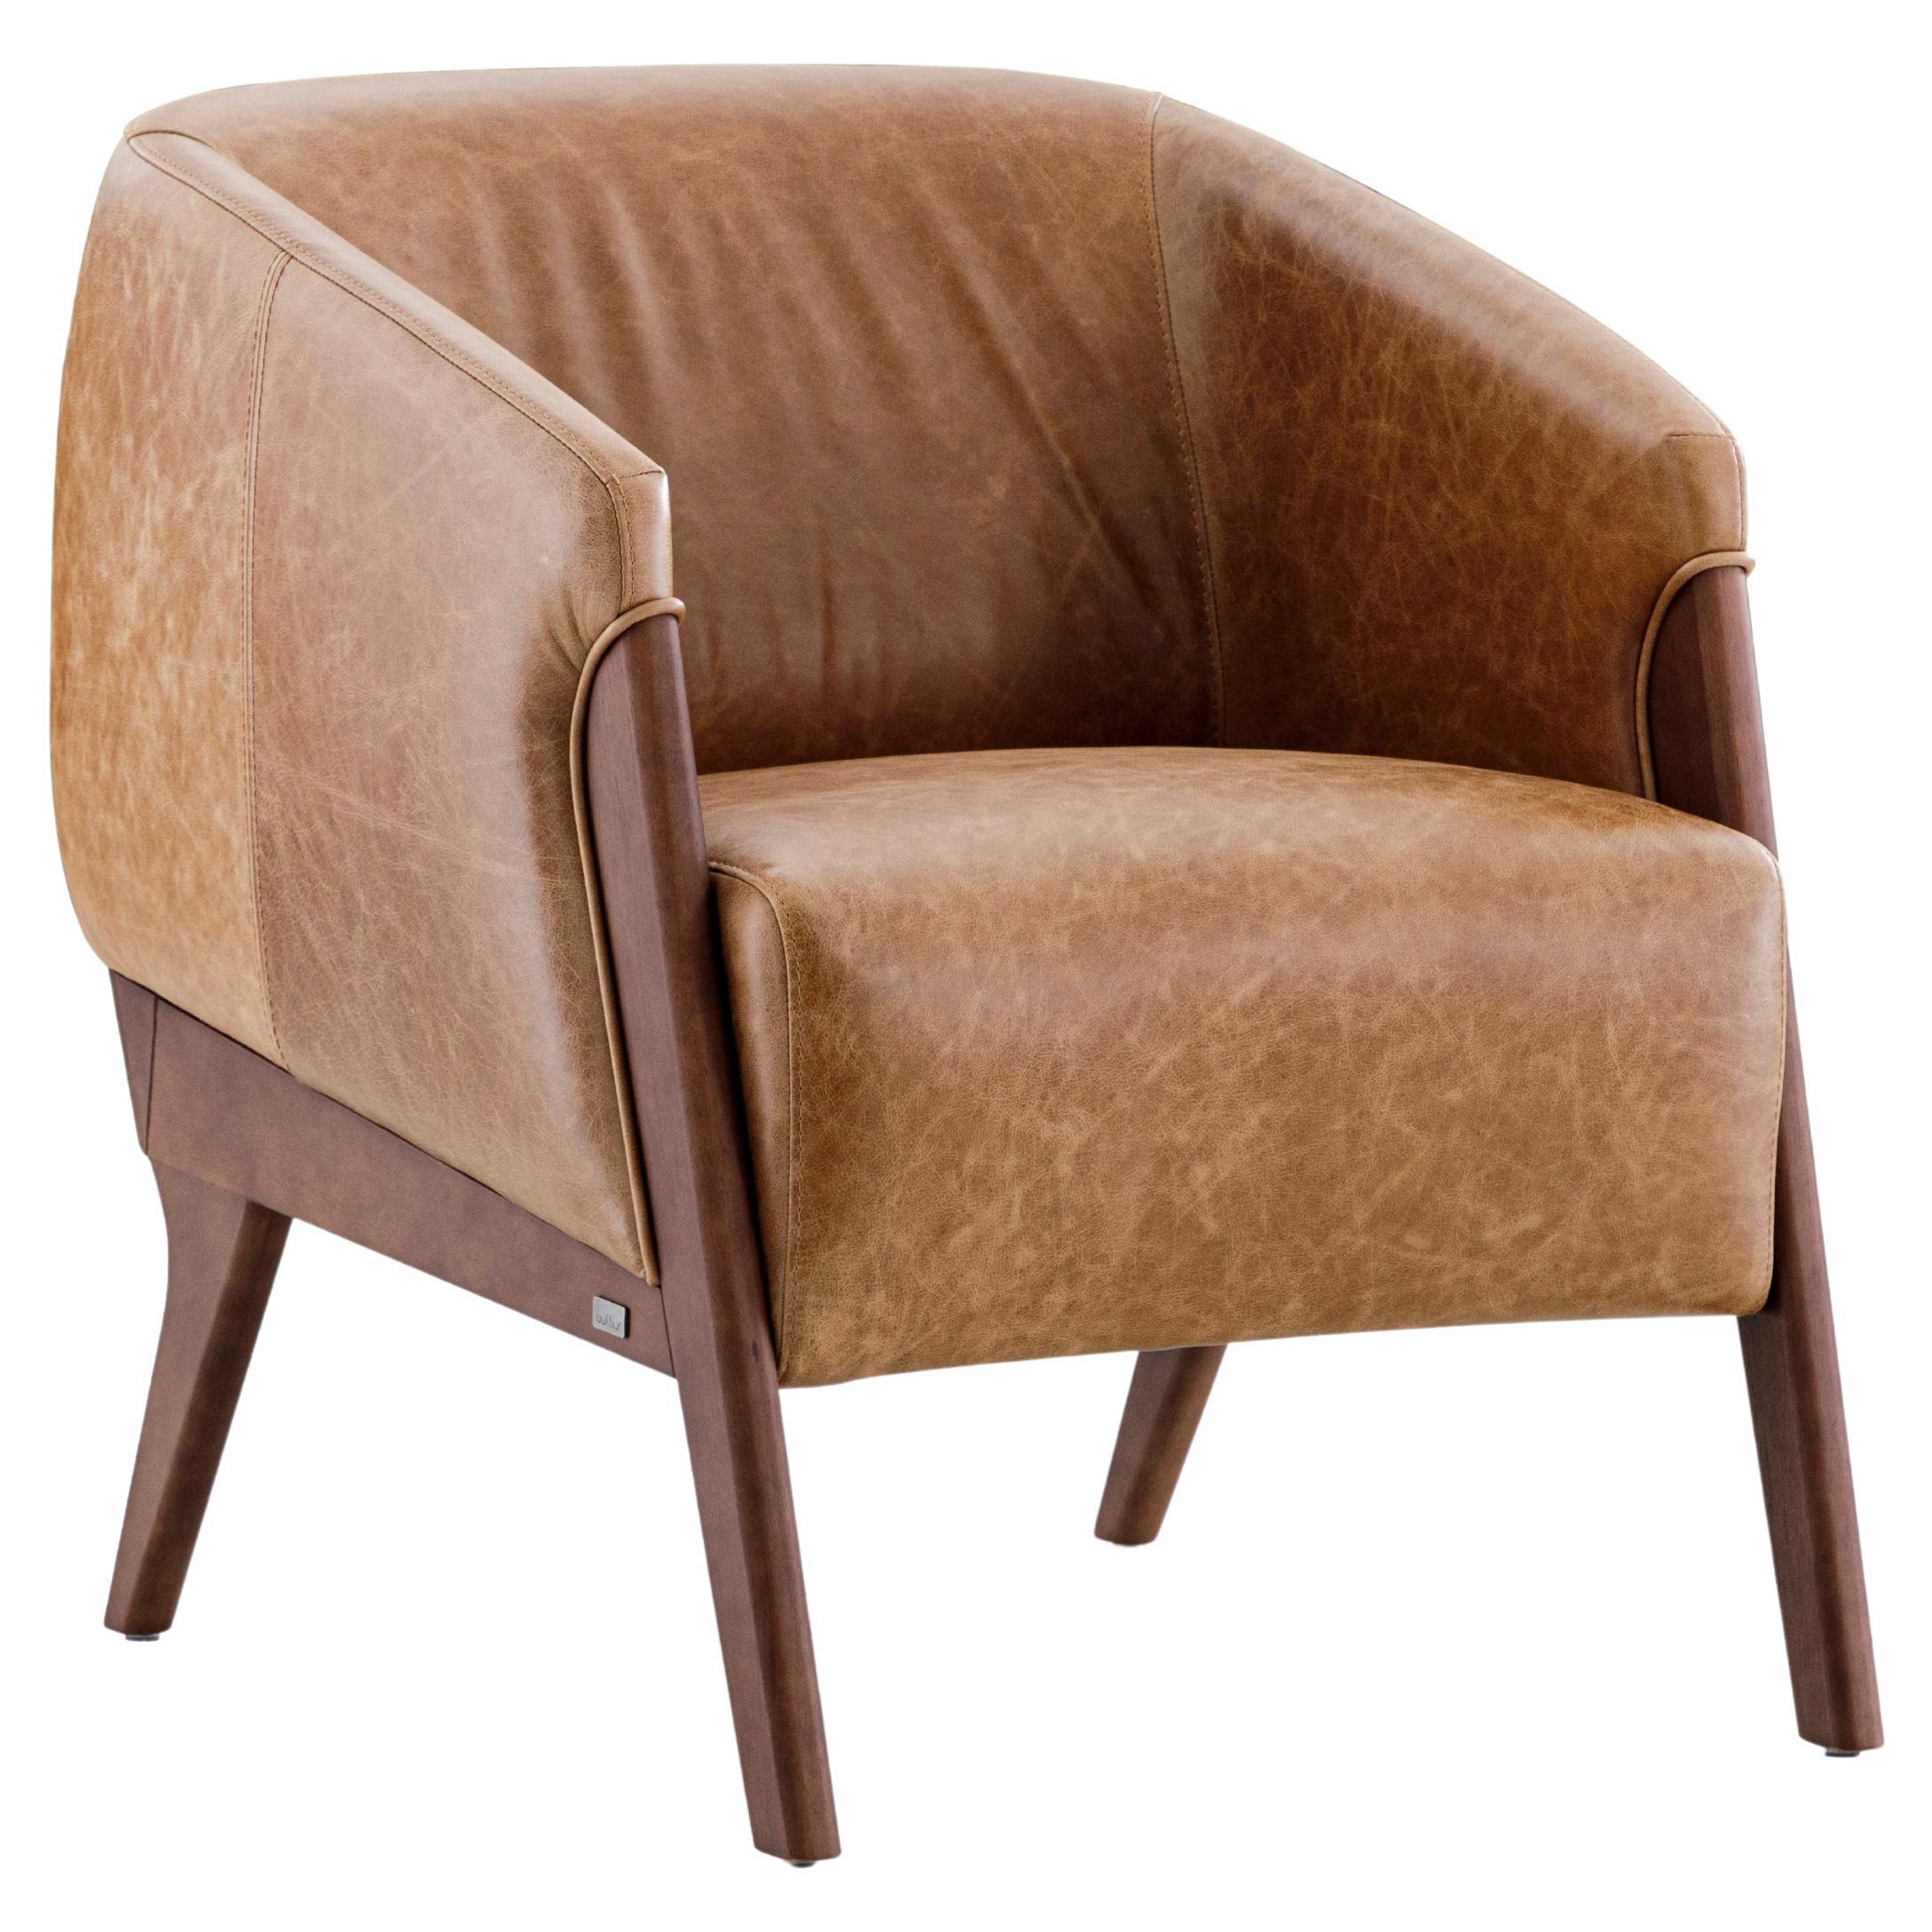 Abra Armchair in Brown Leather and Walnut Wood Finish